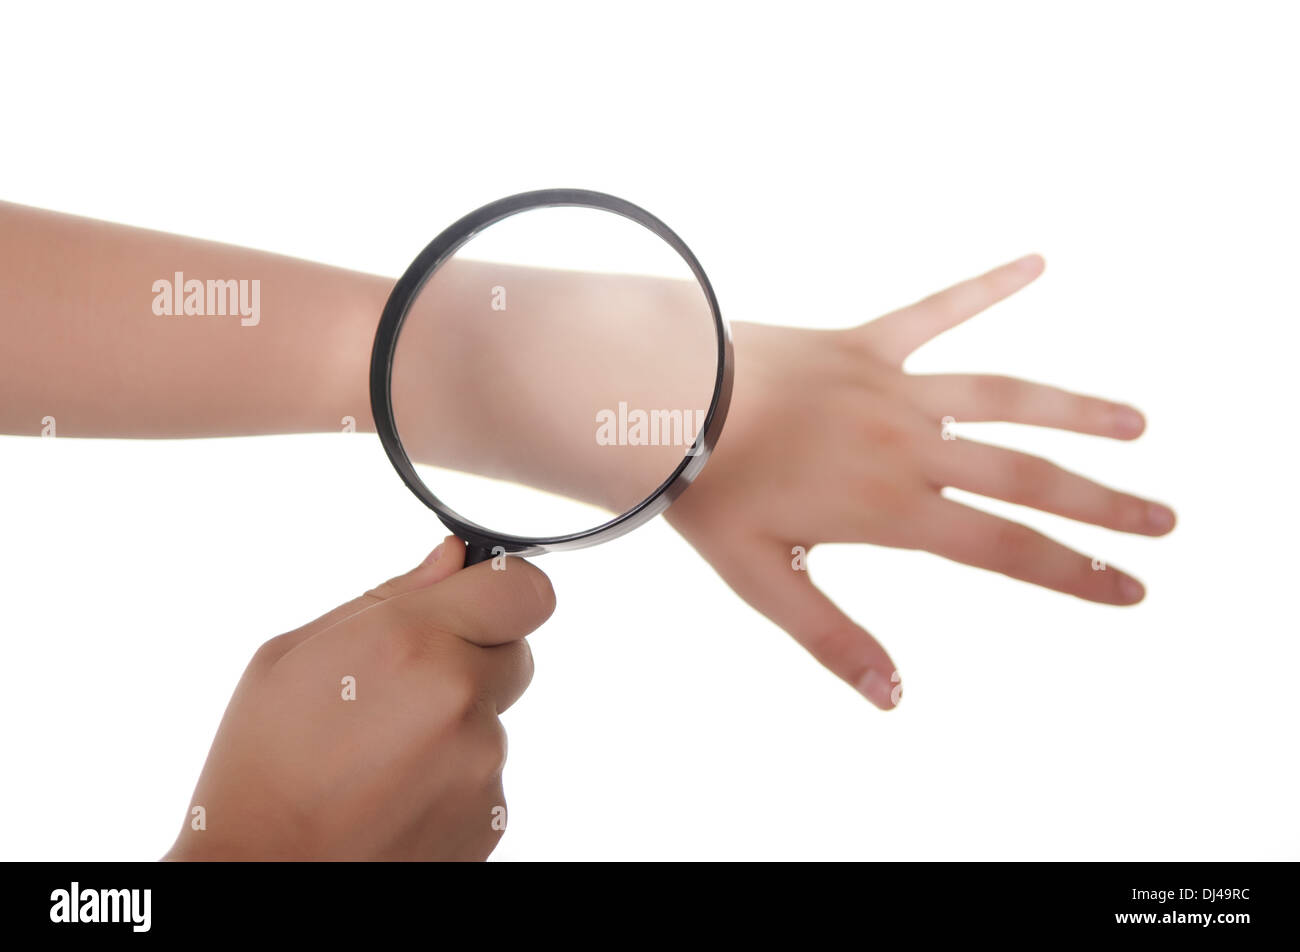 hand, magnifying glass and skin Stock Photo